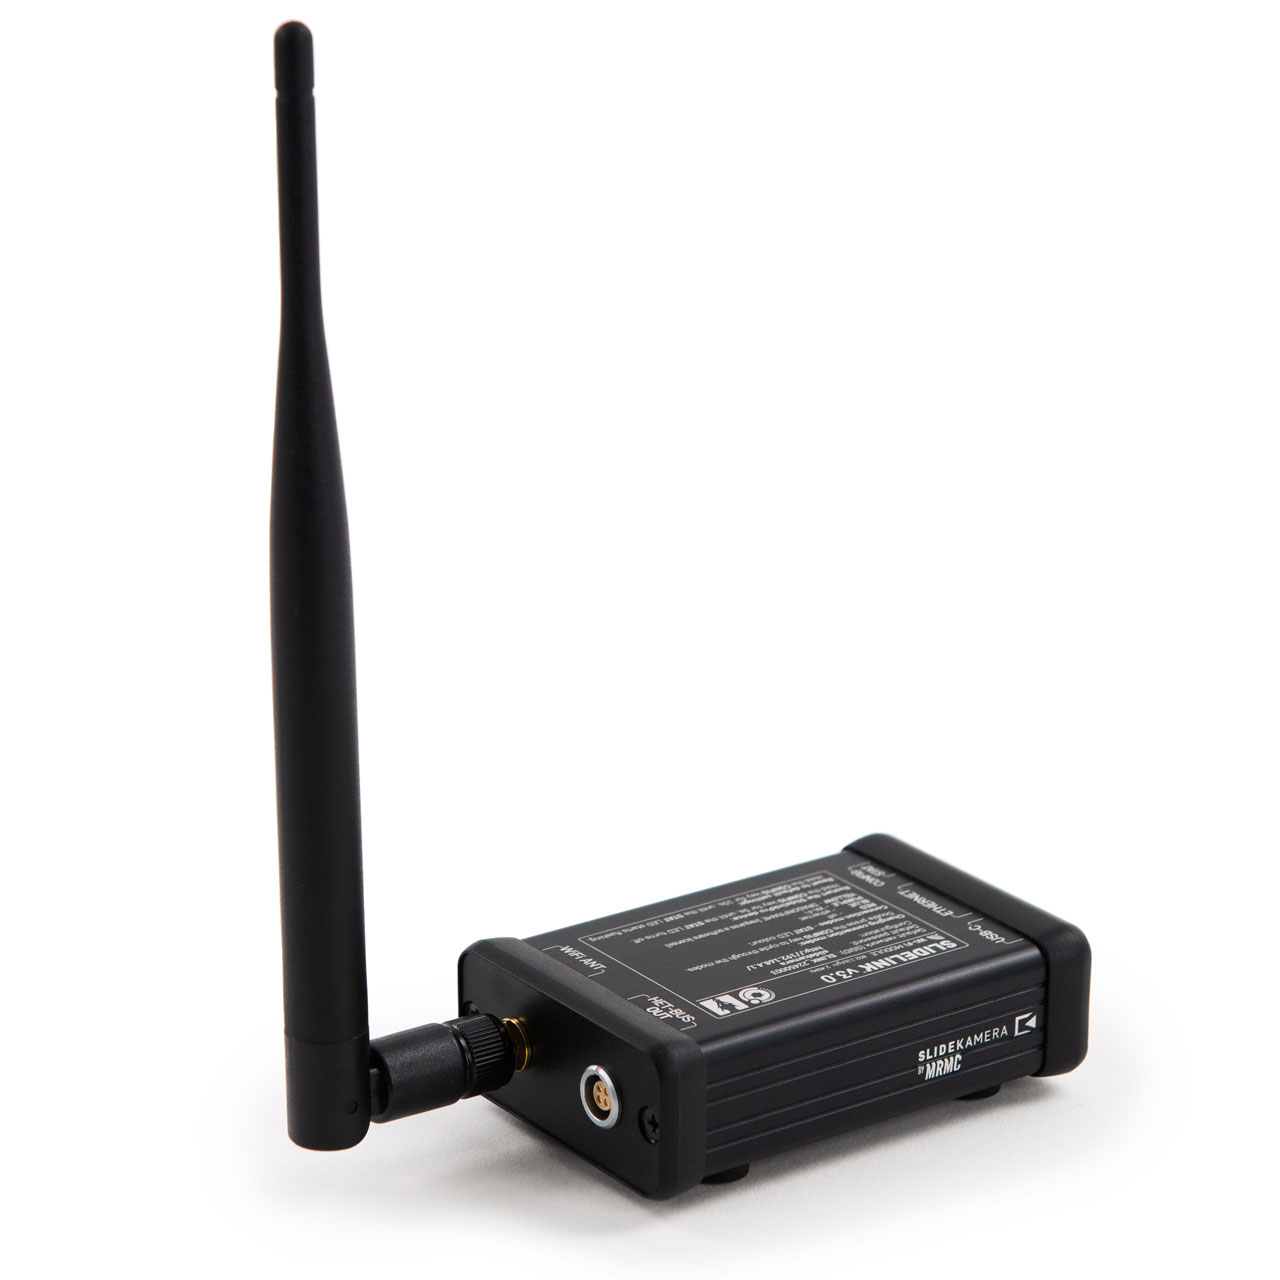 Slidelink 3.0 with a Wi-Fi antenna